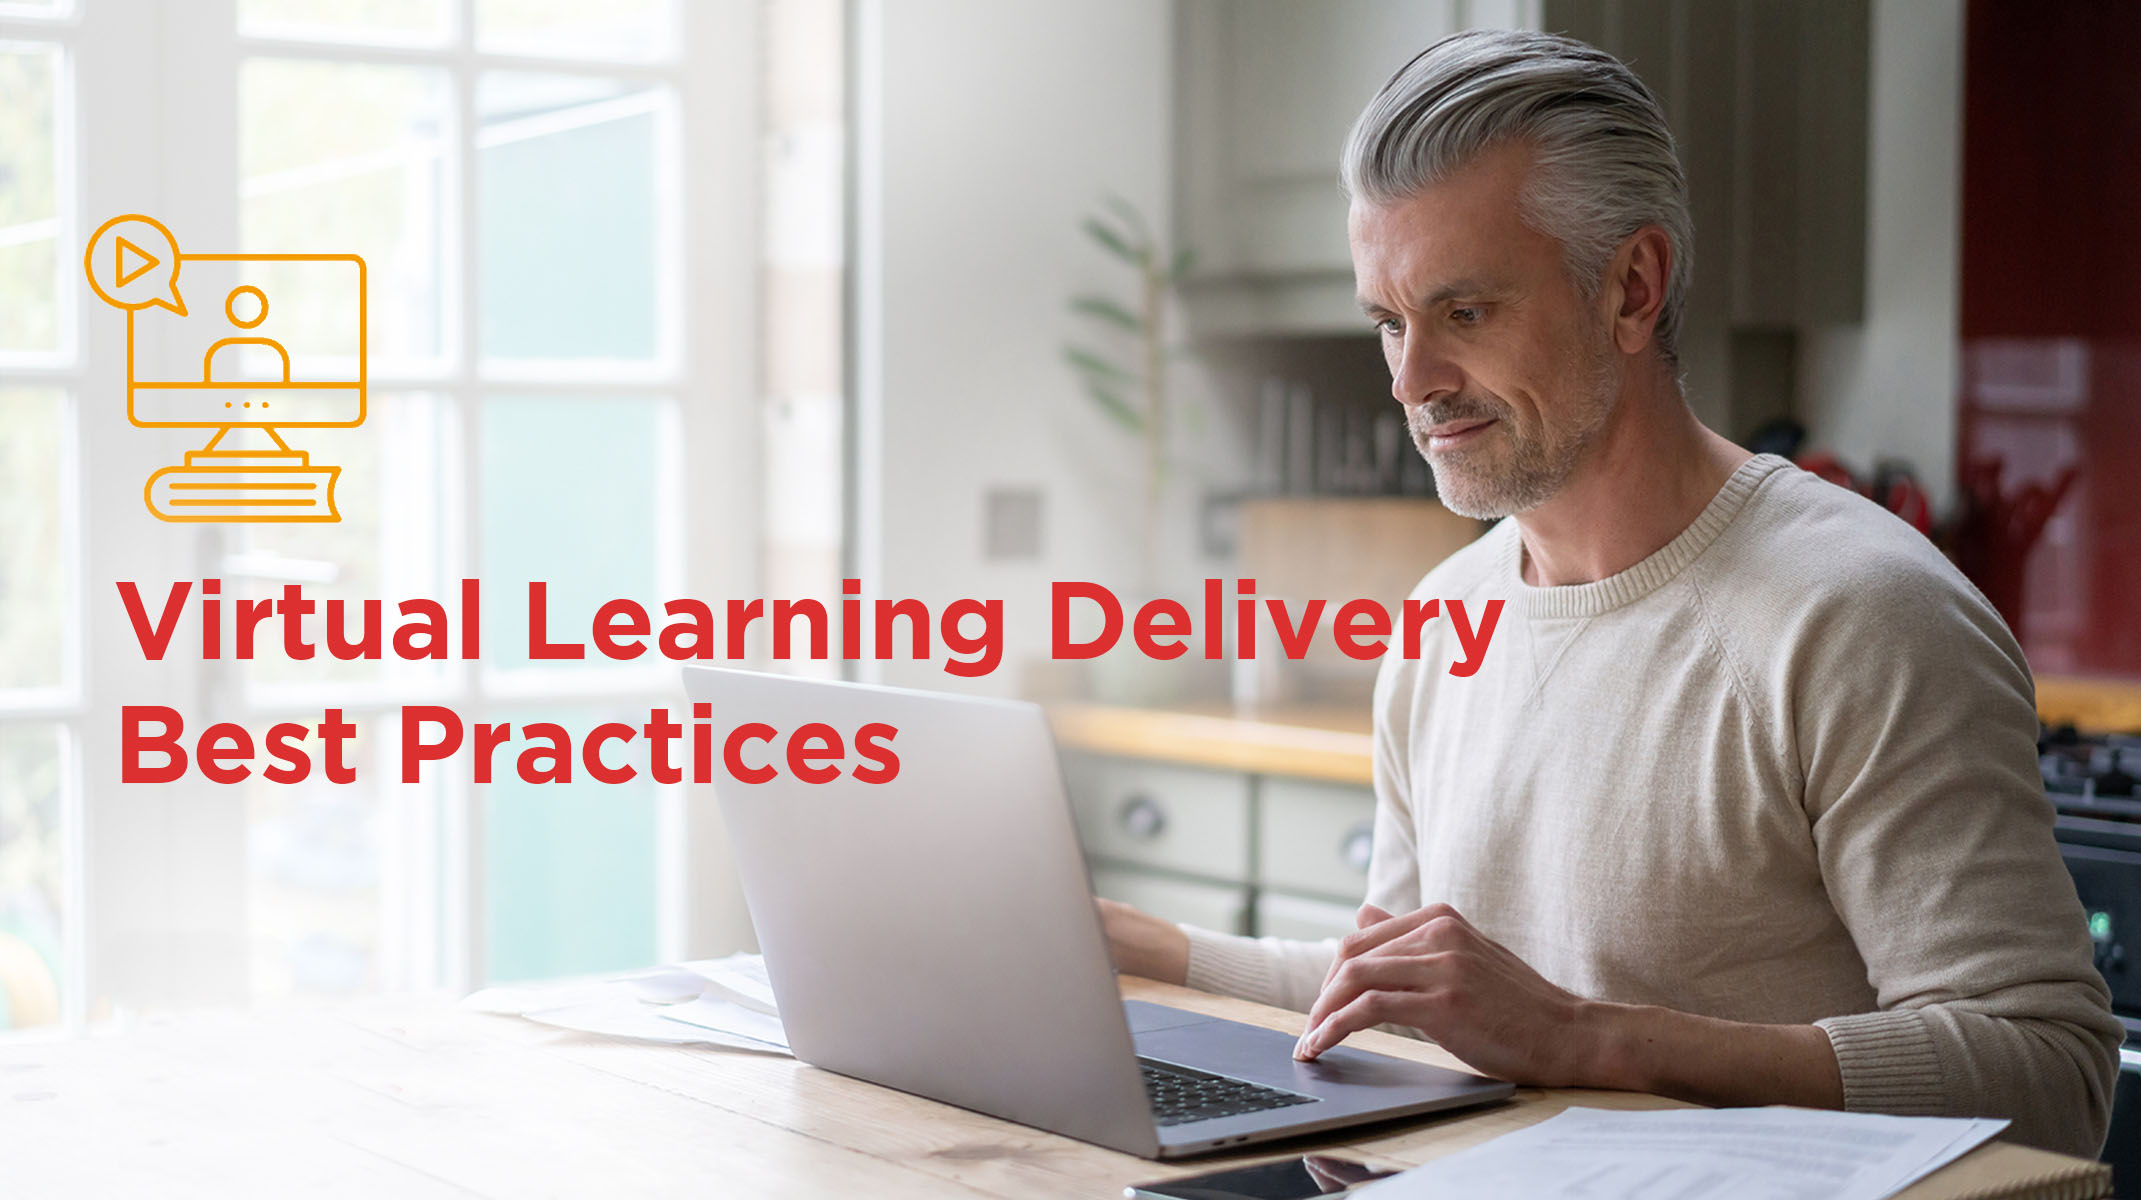 Virtual Learning Delivery Best Practices